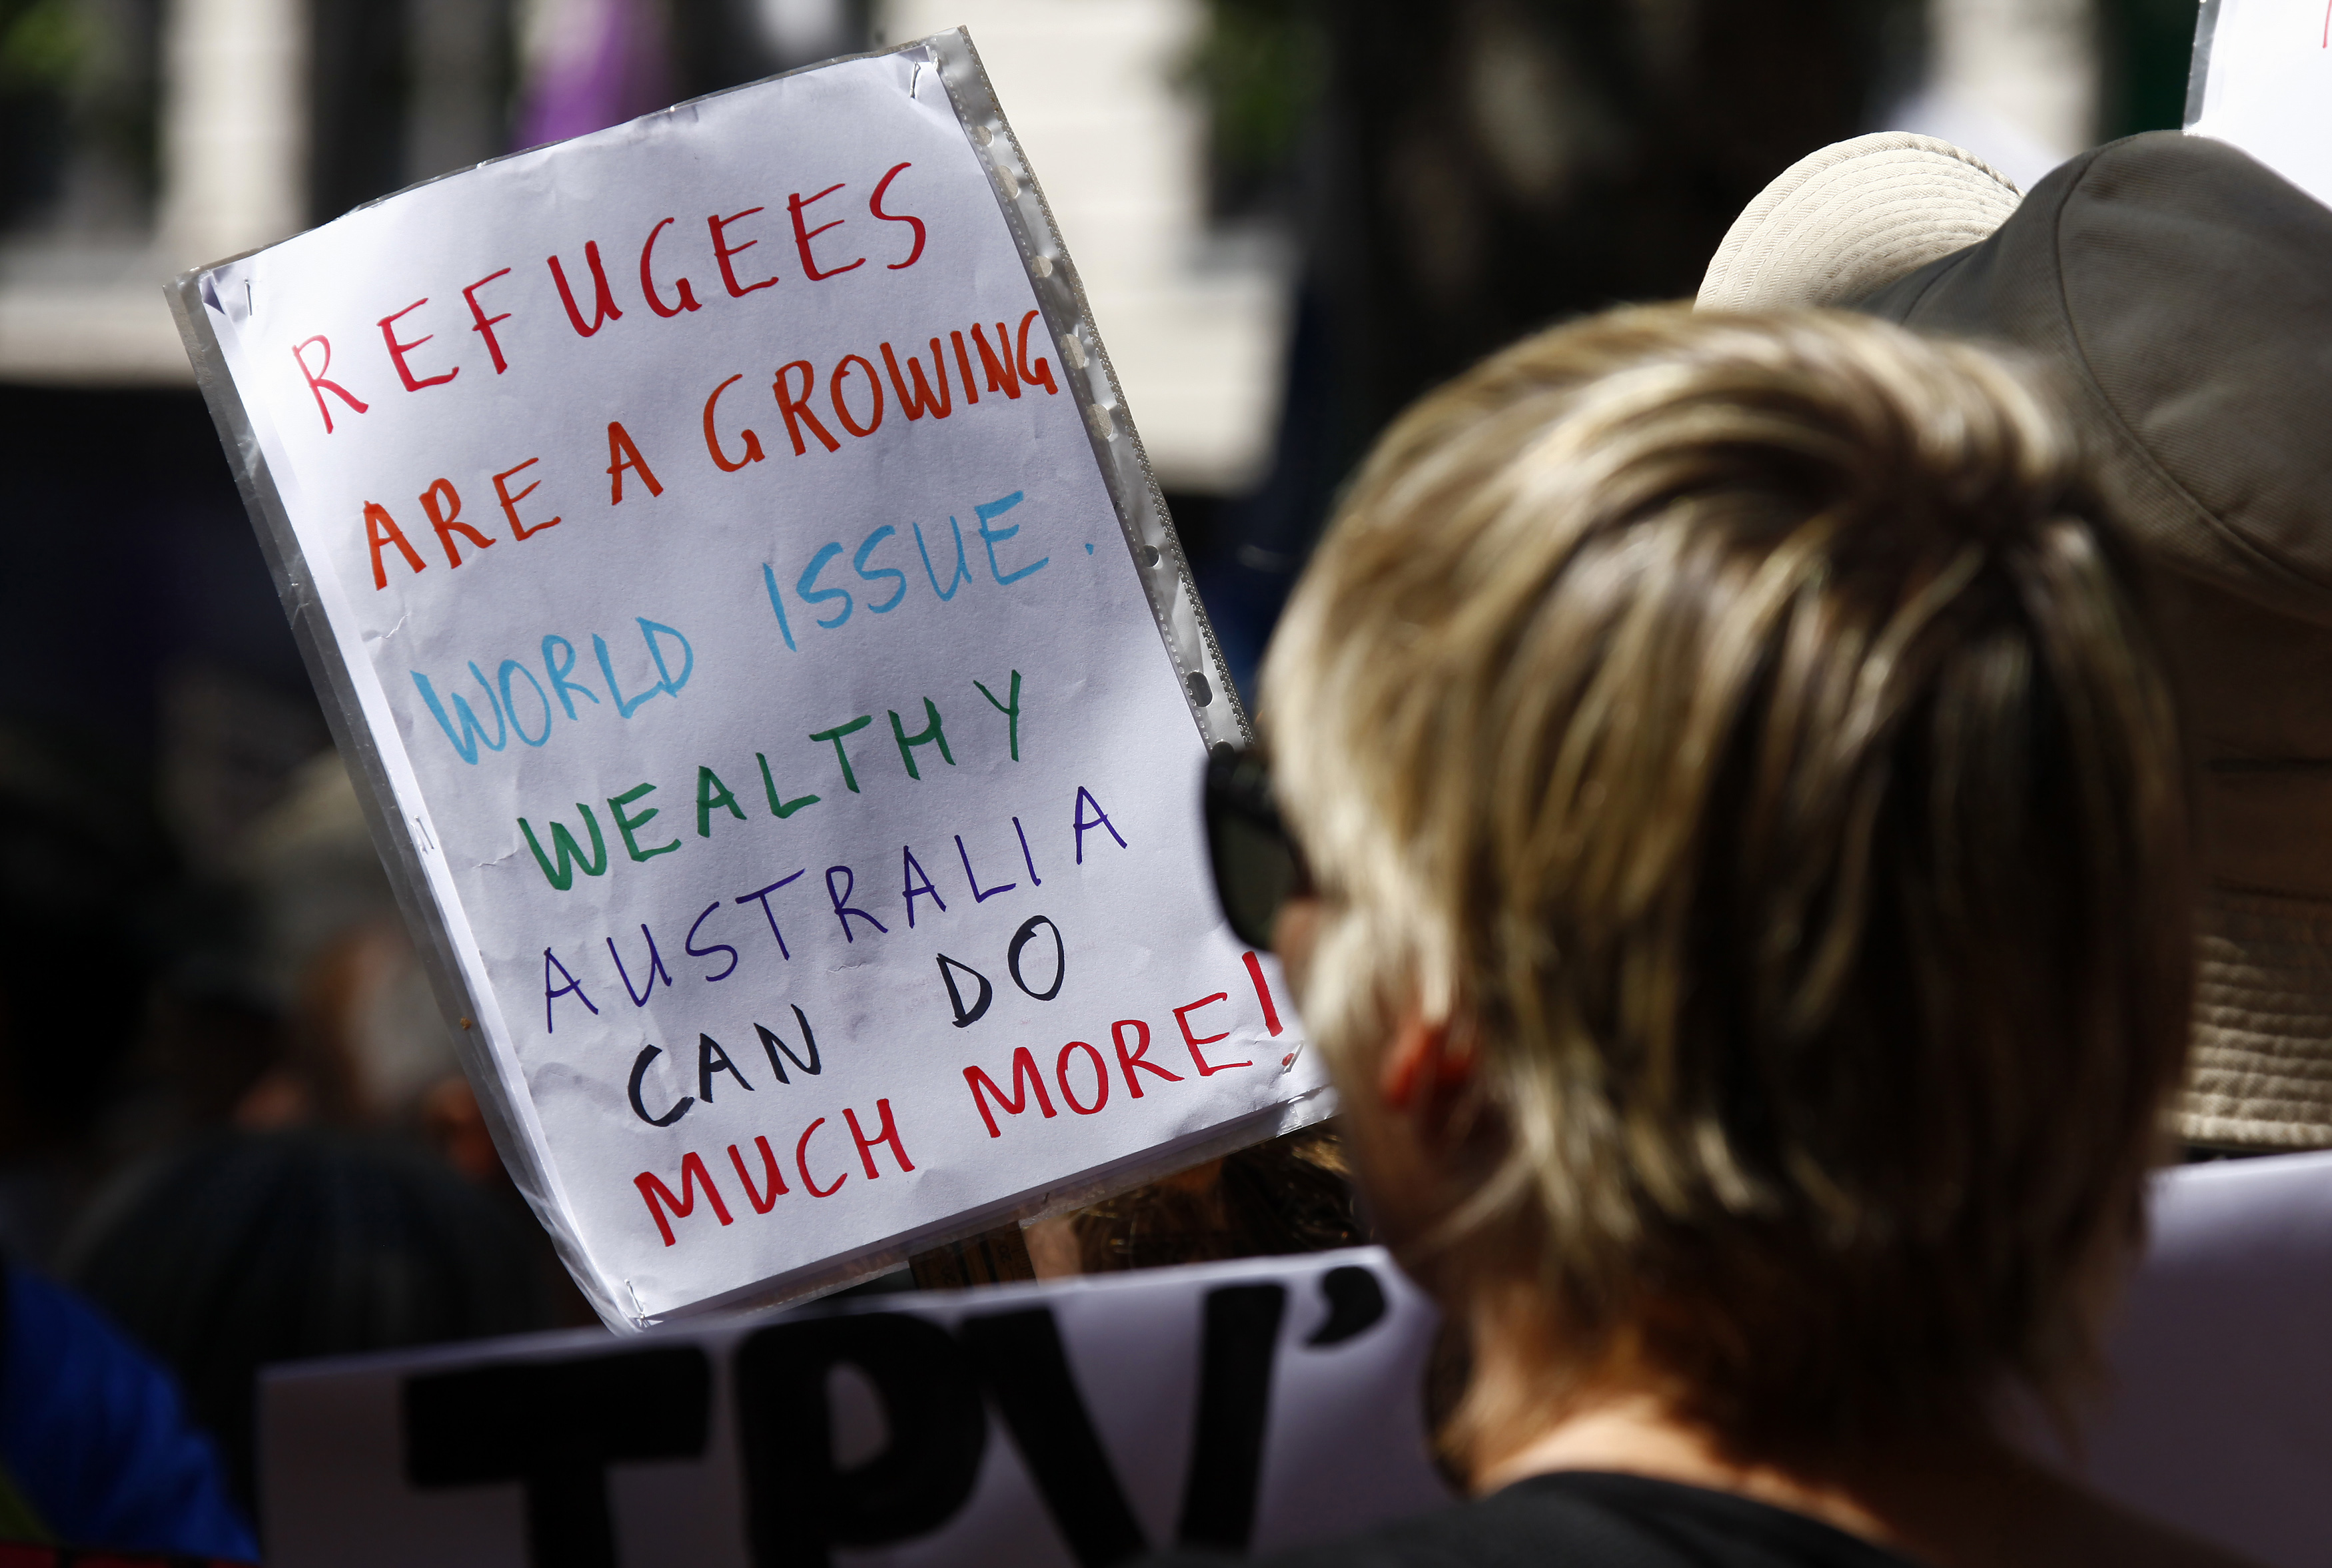 Protesters hold placards at the Stand up for Refugees rally held in central Sydney on Oct. 11, 2014 (David Gray—Reuters)